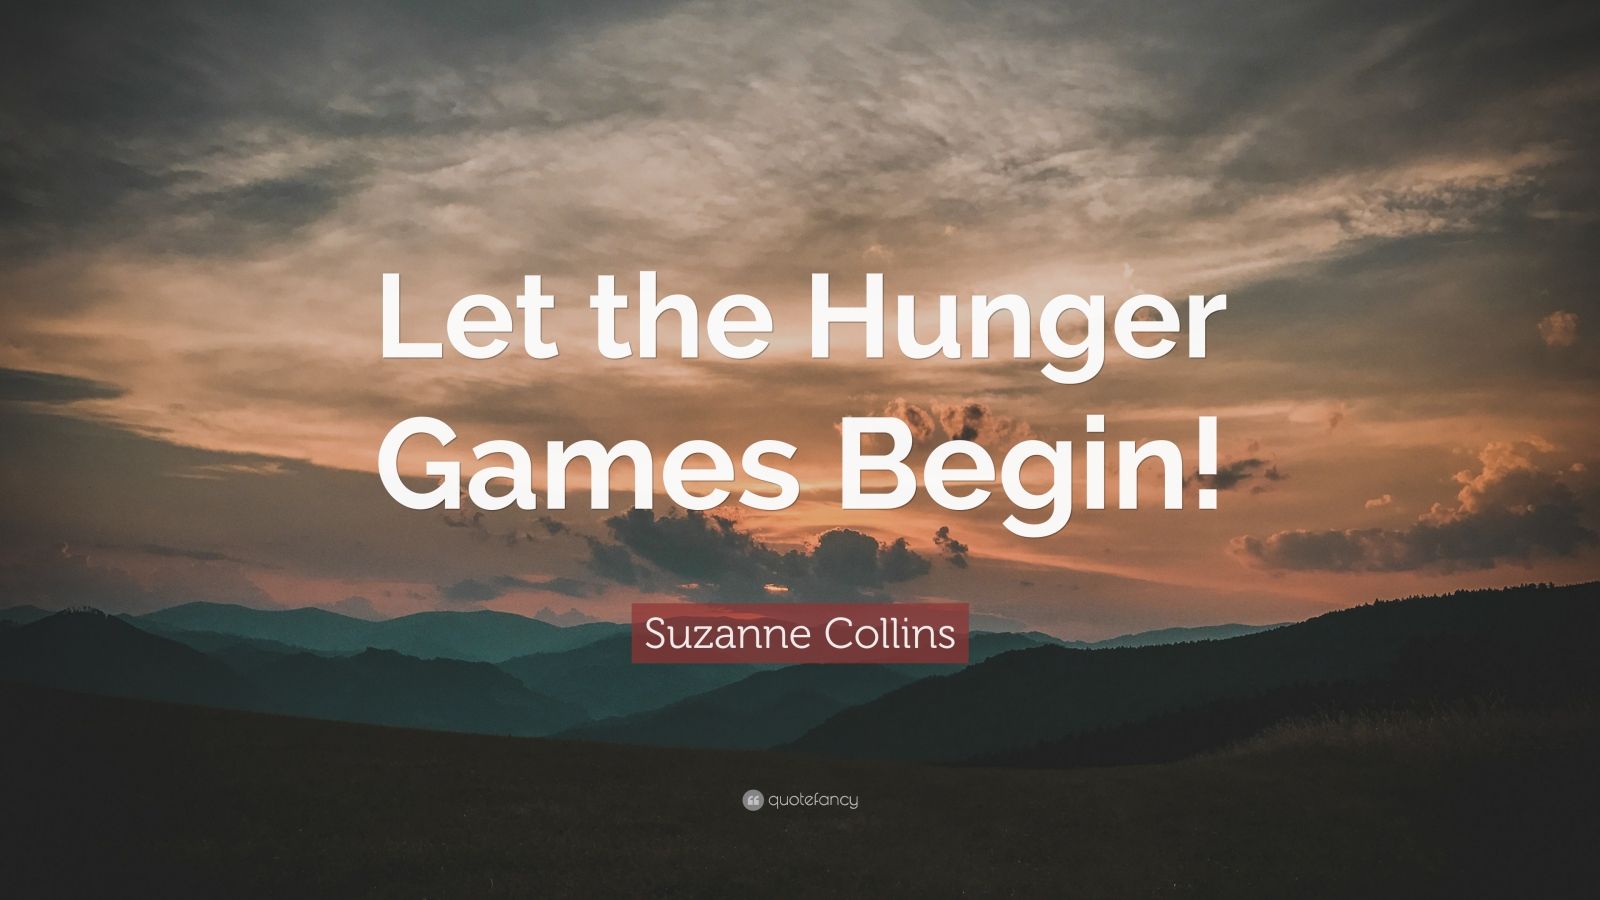 Suzanne Collins Quote: “Let the Hunger Games Begin!” (6 wallpapers